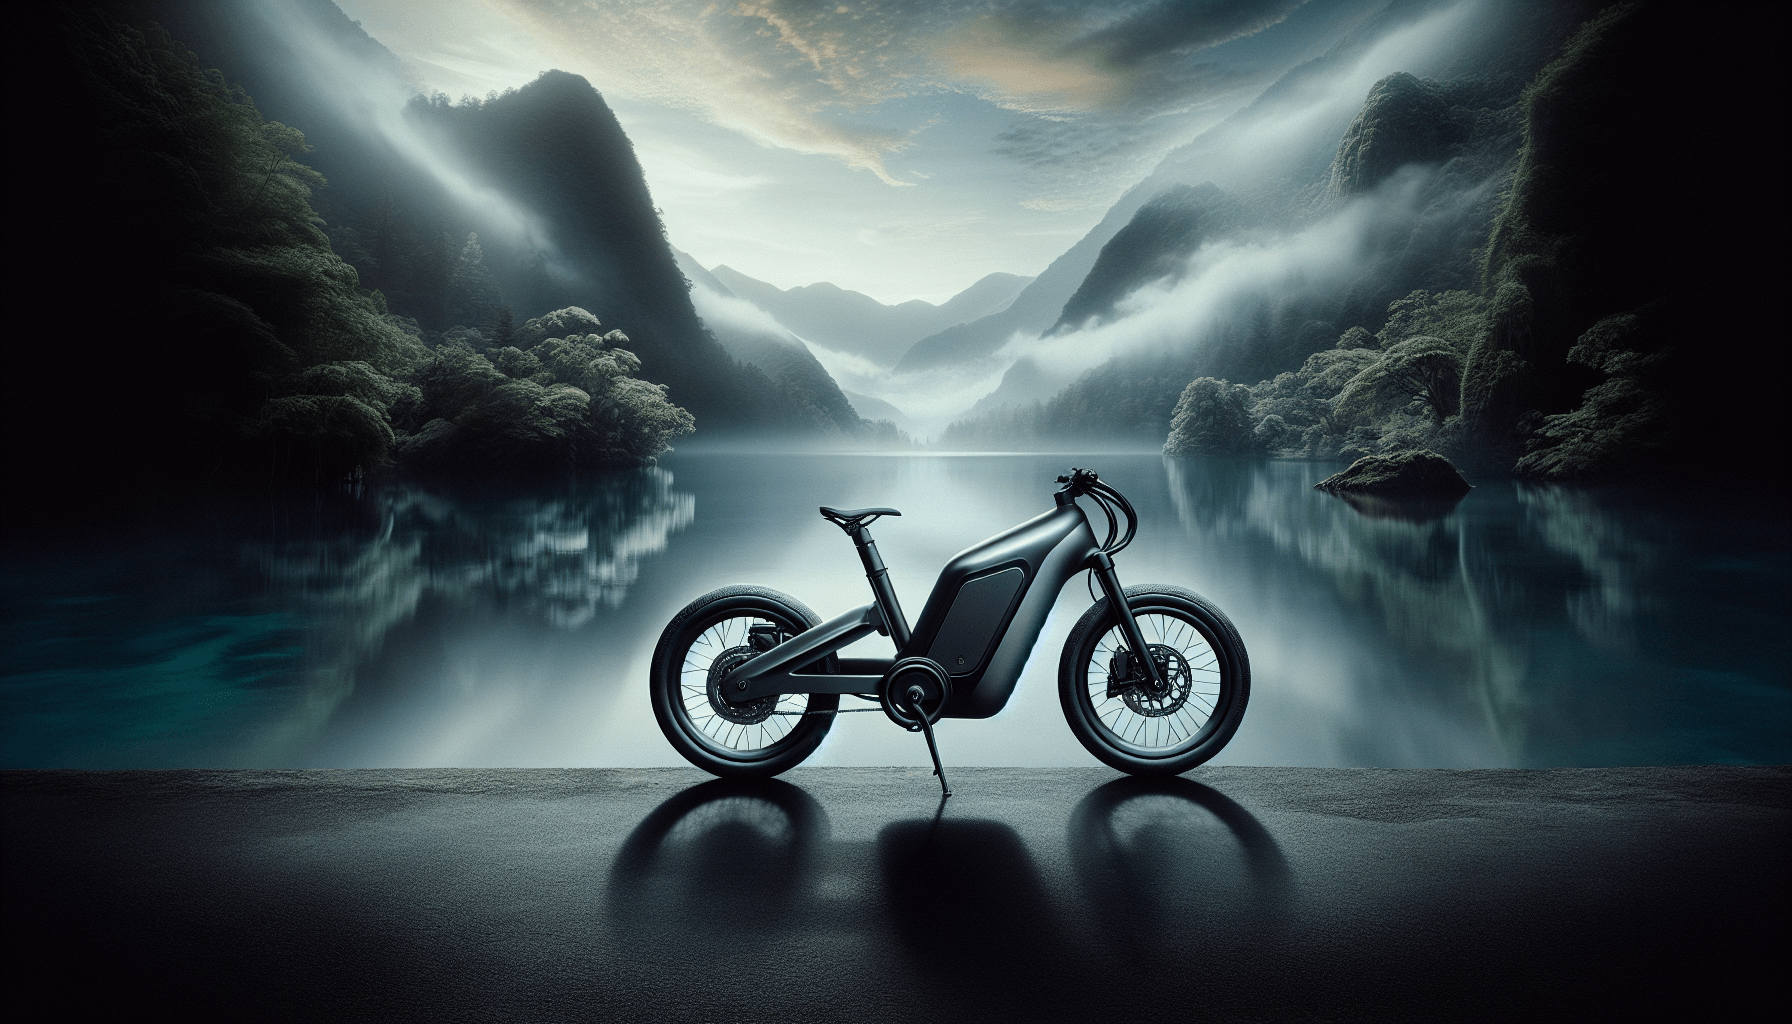 Can I Ride An Electric Bike Without Charging It?